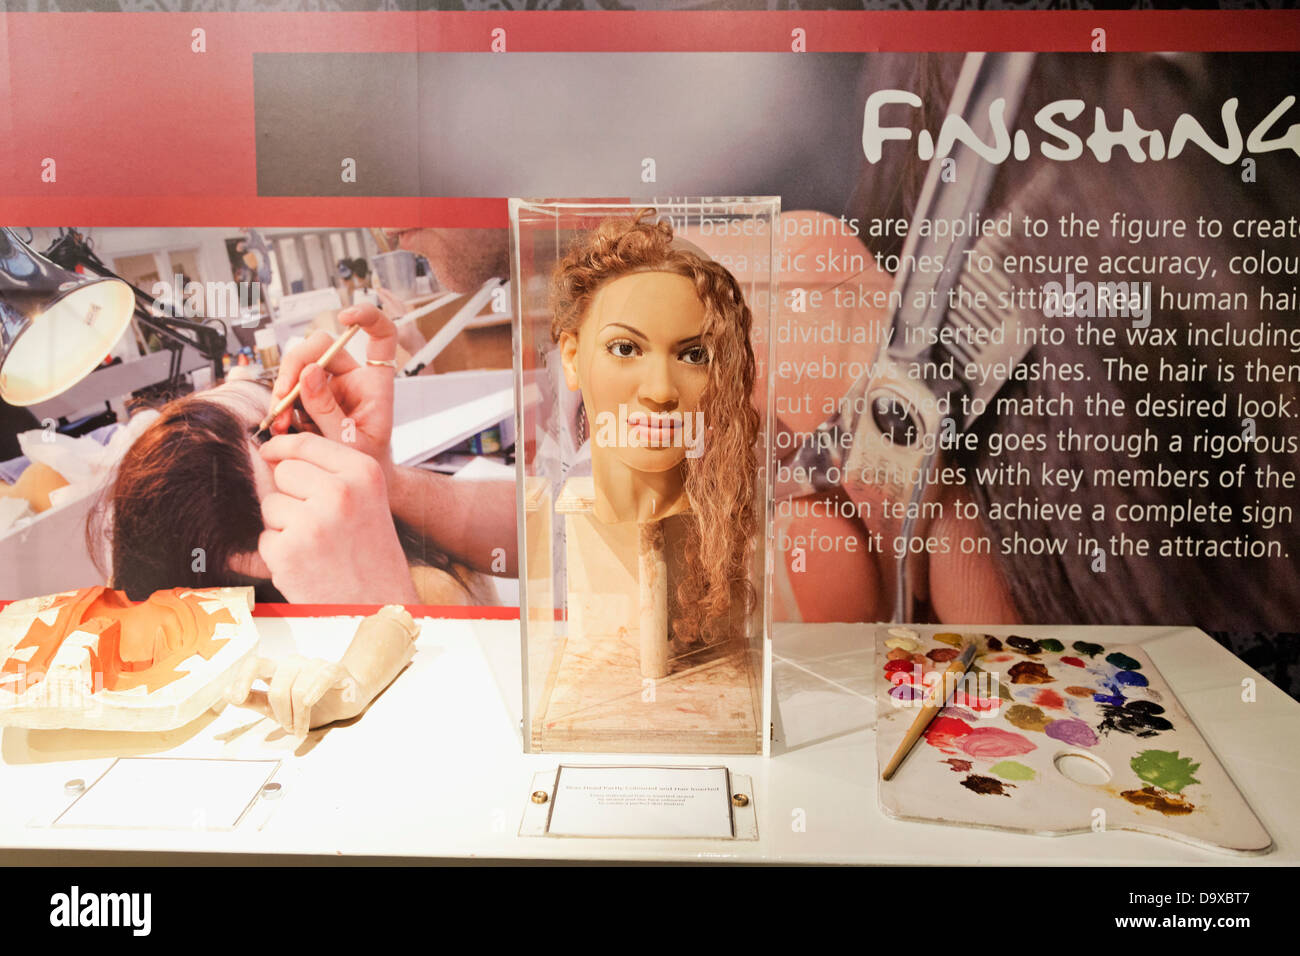 UK, England, London, Madame Tussauds, Exhibit of the Waxwork Making of the Popstar Beyonce's Head Stock Photo